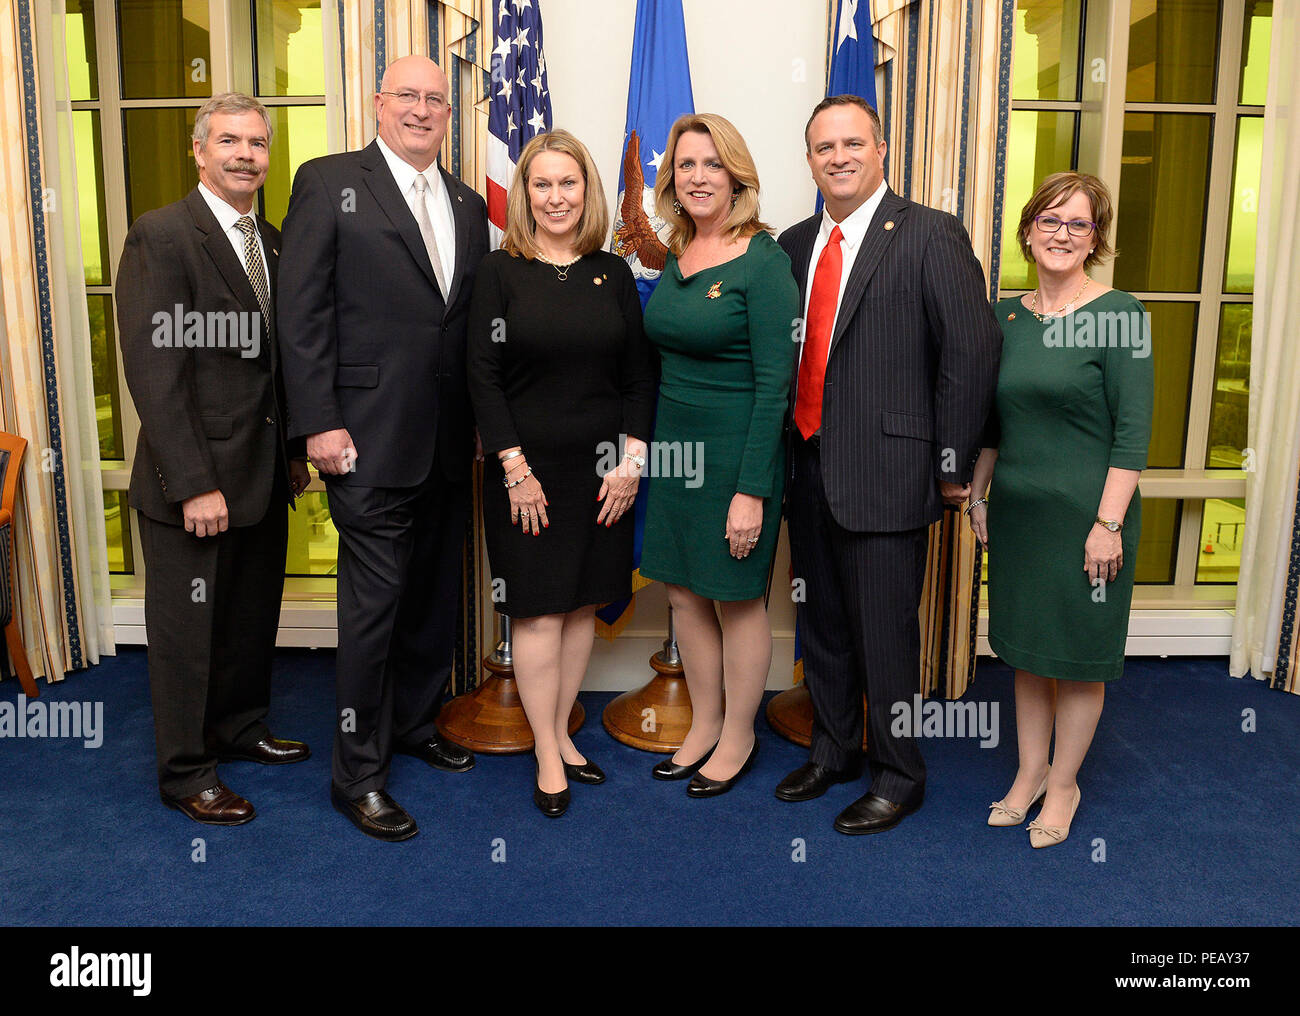 Secretary of the Air Force Deborah Lee James stands with, from left, John  Wood, Chairman of the board, TAPS; David Coker, president, Fisher House  Foundation, Inc.; Bonnie Carroll, founder, TAPS; Brian Gawe,